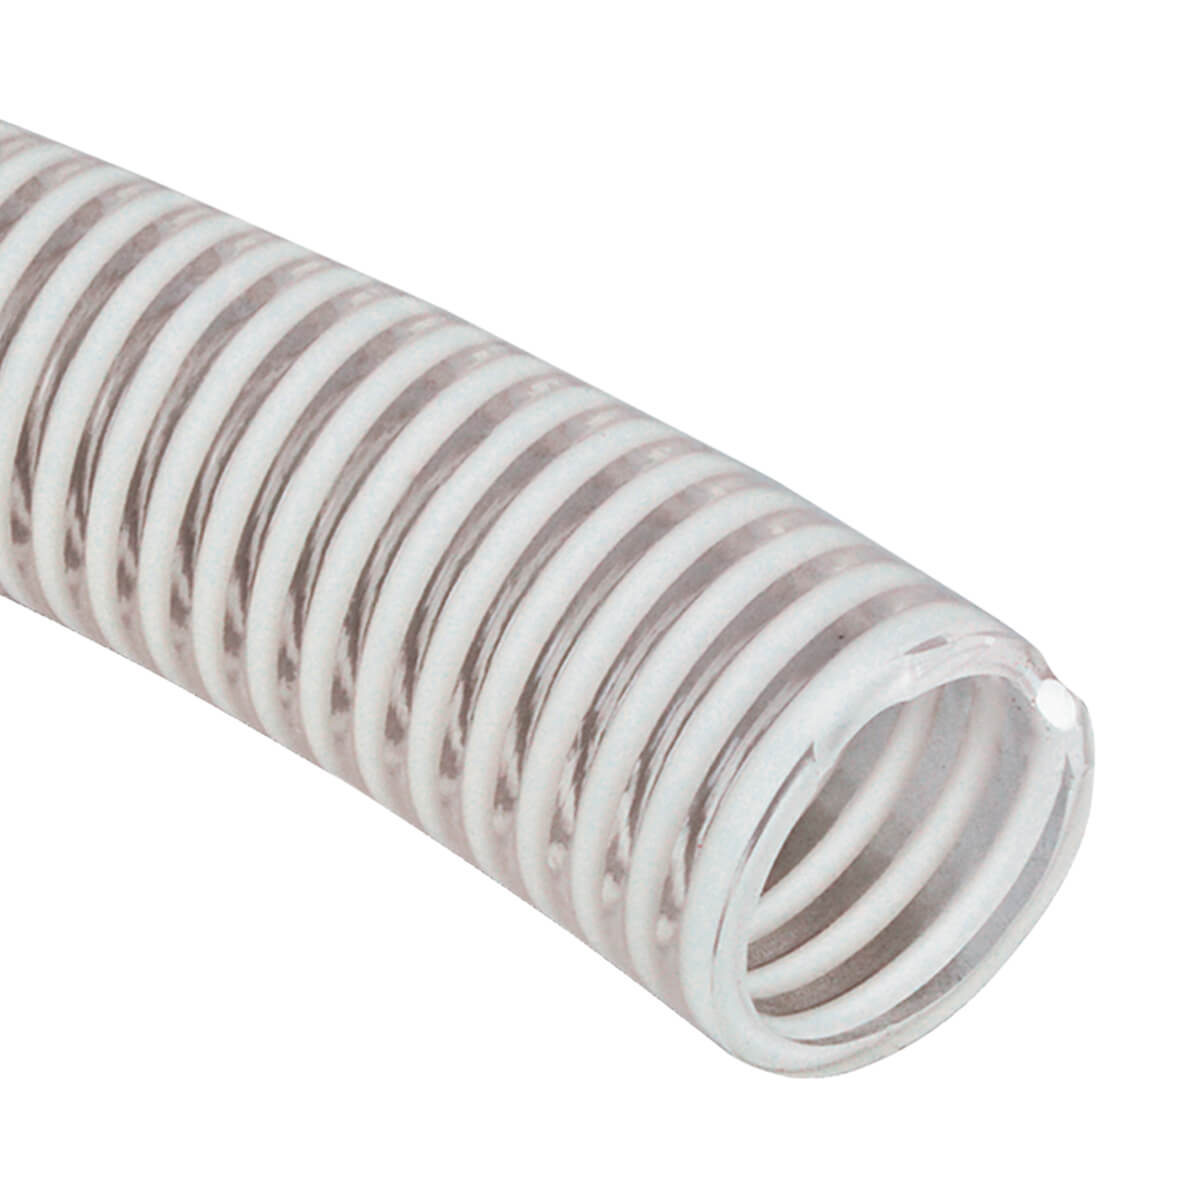 Clear PVC Suction Hose — Bulk/Uncoupled - 1-1/4-in - Price Per Ft